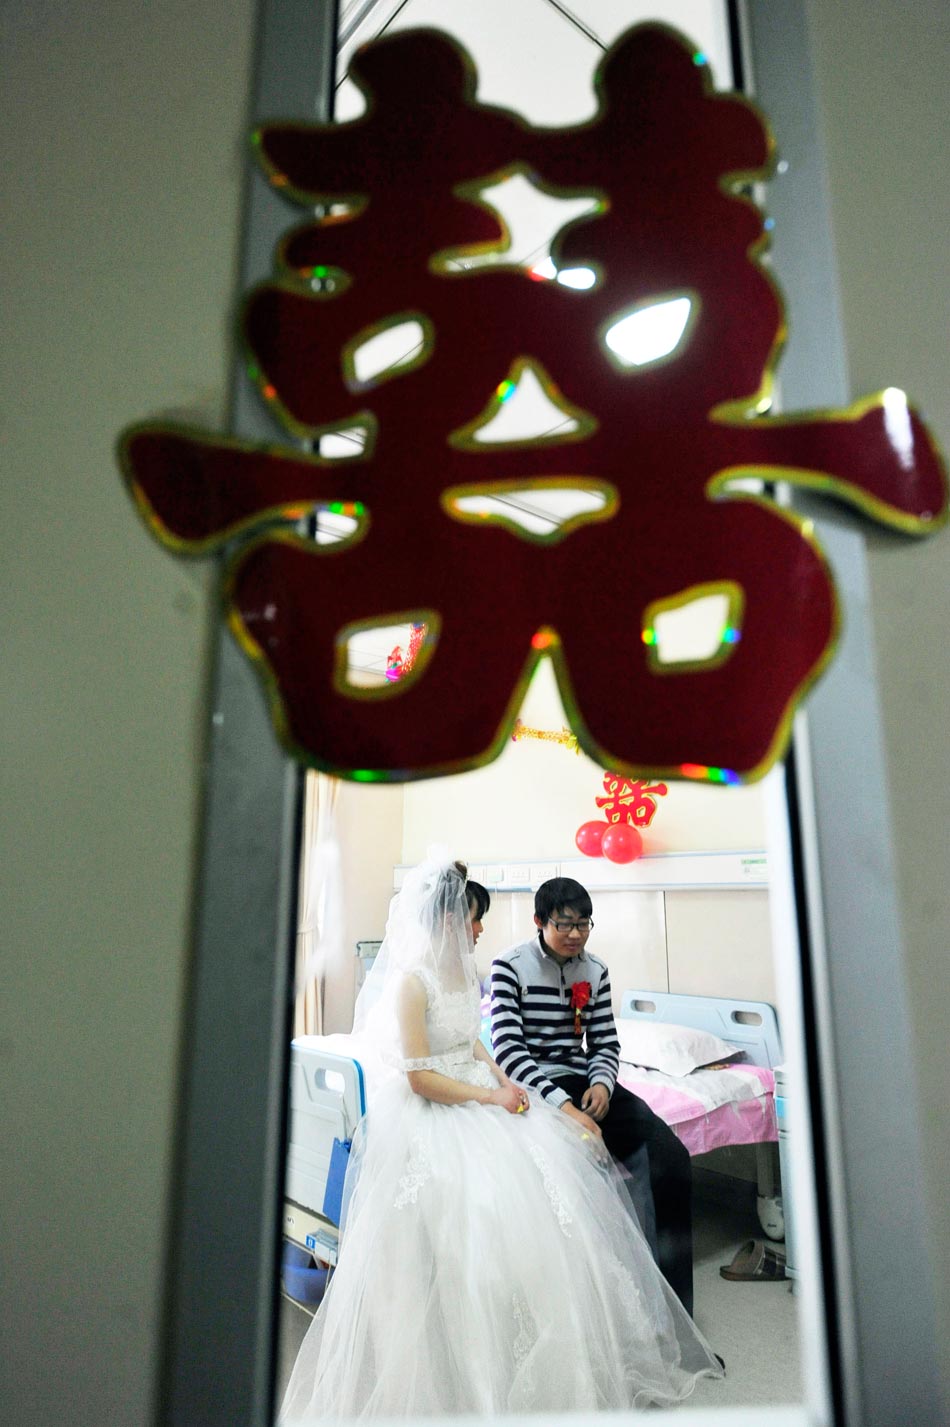 A special wedding ceremony is held in a ward of Qianfoshan Hospital, Shandong province, Feb. 14, 2012. Although the bridegroom suffered from uremia, the bride still chose to stand by him and fight against the disease together. (Xinhua/Cui Jian)